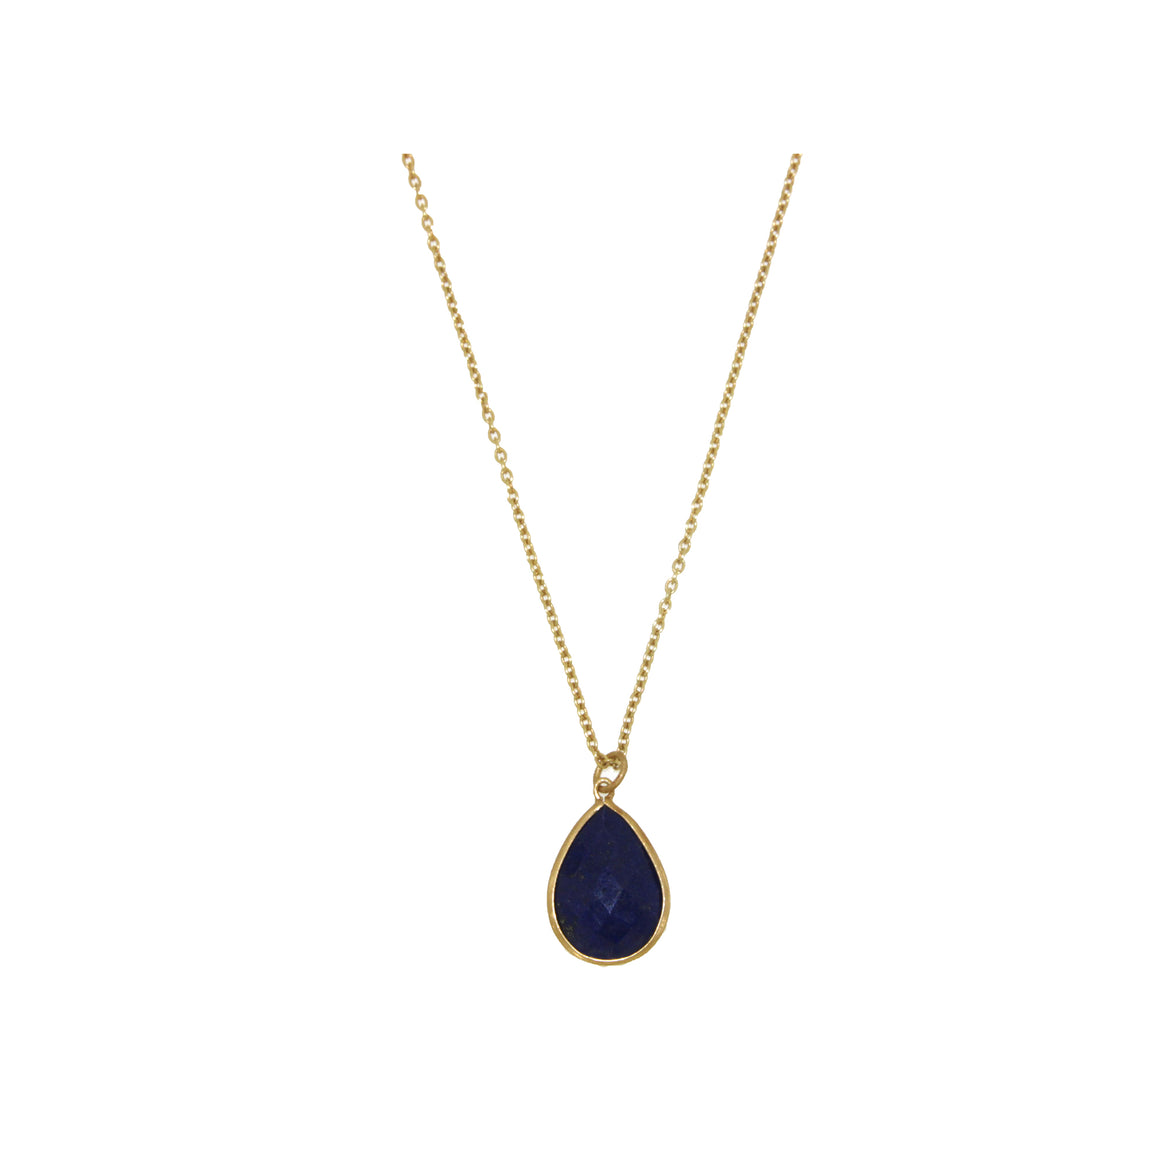 Almond shaped Lapis Pendant in a bezel setting. Exquisitely hand crafted and naturally timeless, this necklace is a 16"-18" long and set in 22 carat Vermeil over Sterling Silver.